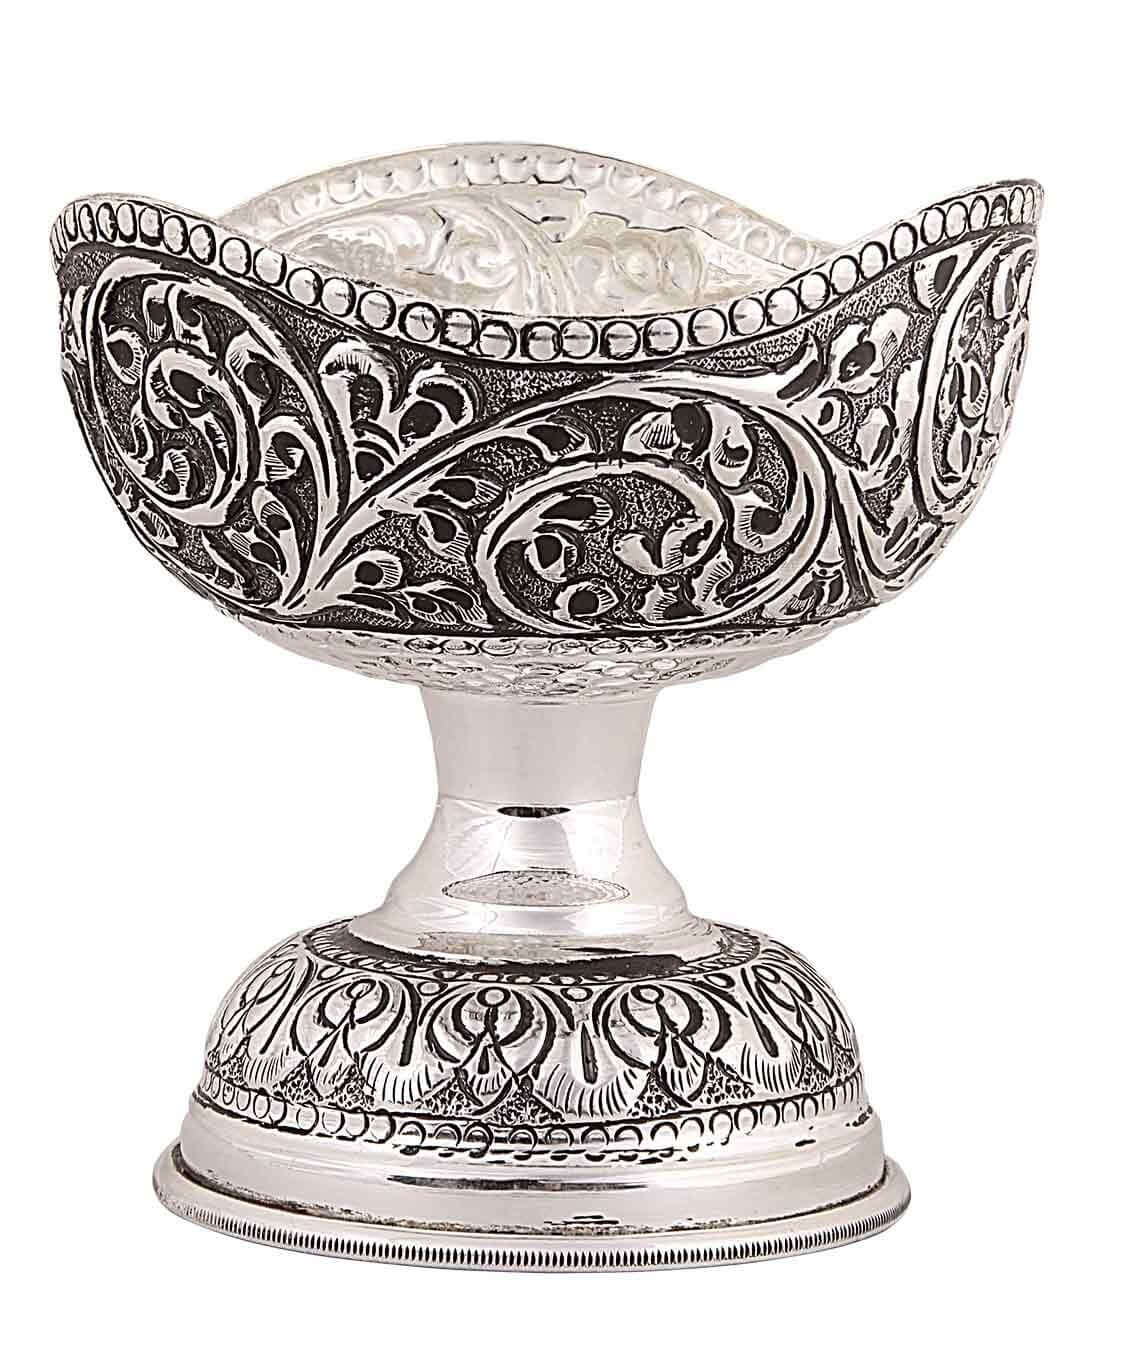 Silver Gift and Articles Silver Ice-cream Bowl Image 6